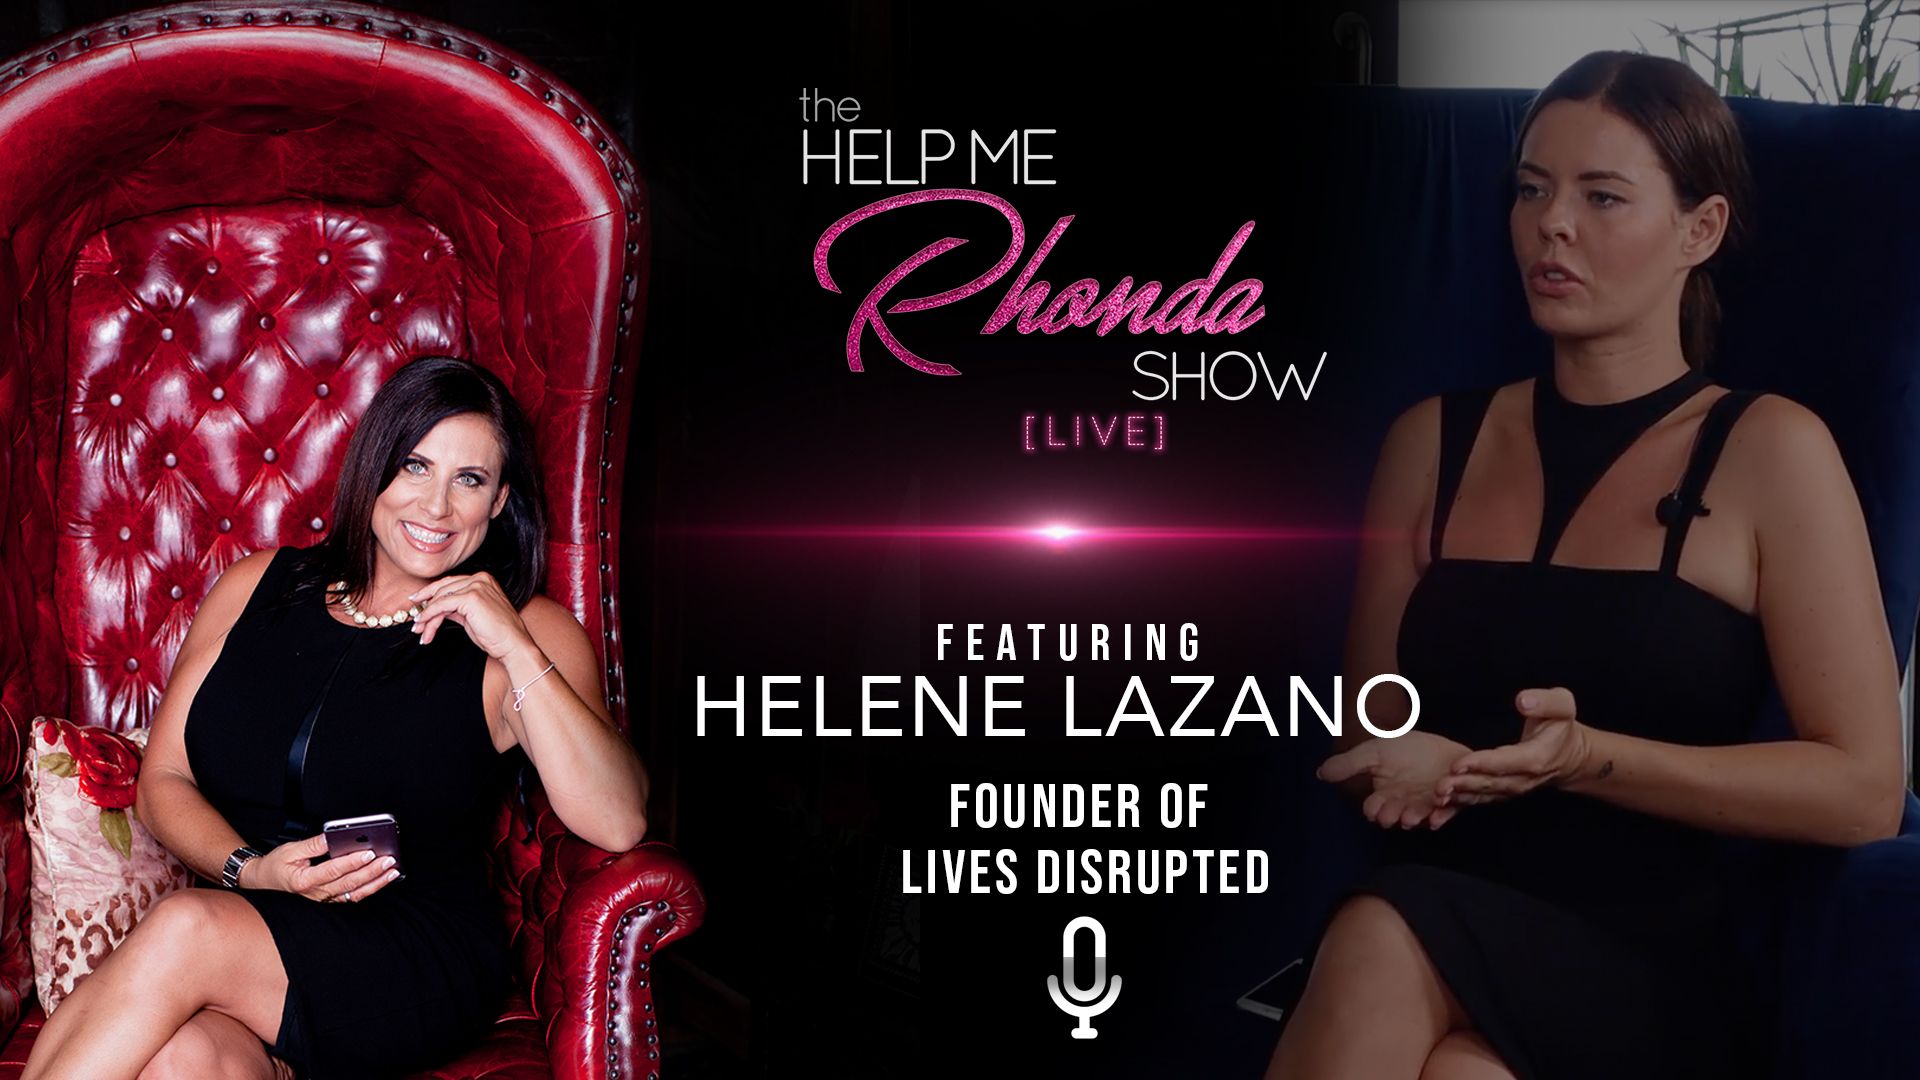 Helene Lazano - How To Step Out Of Your Comfort Zone & Make Change In The World!